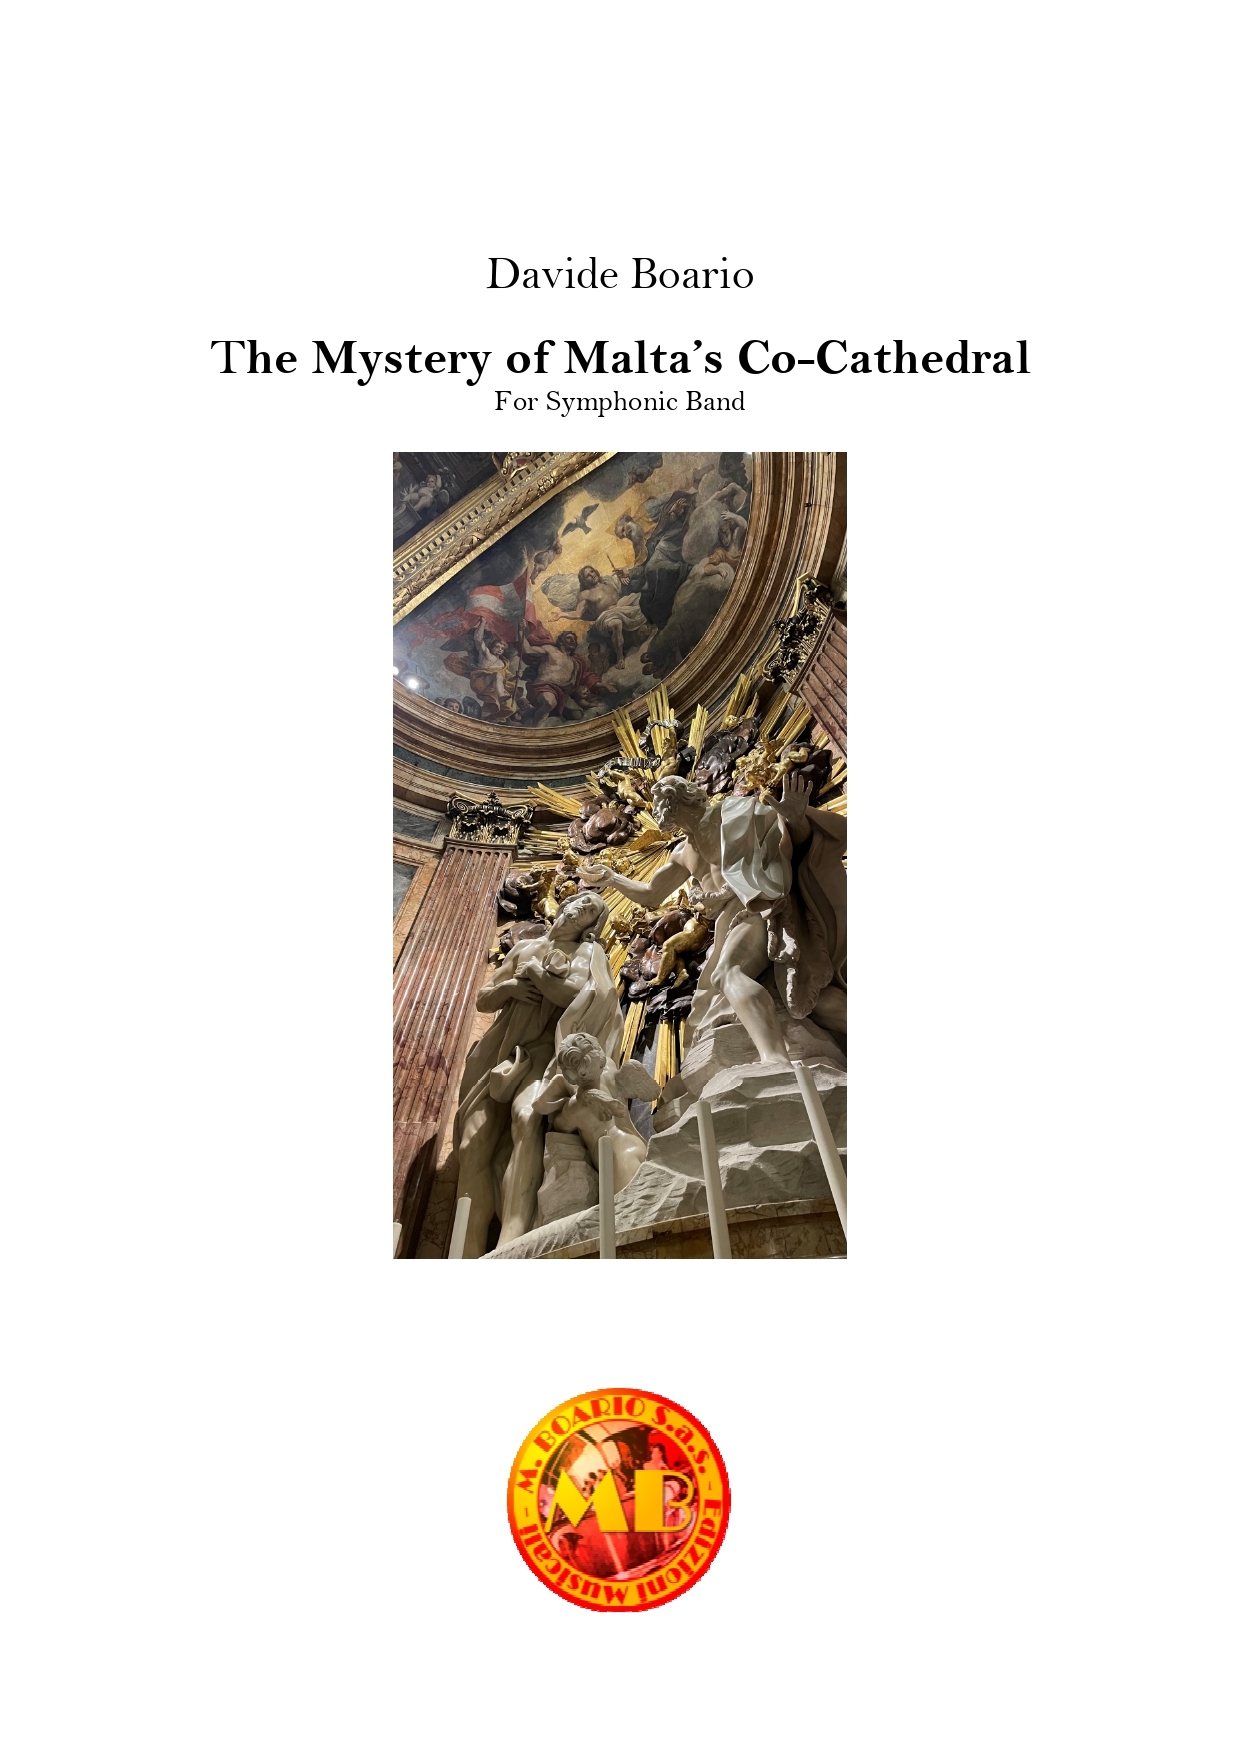 Copertina_the_Mystery_of_Maltas_...._page-0001_2